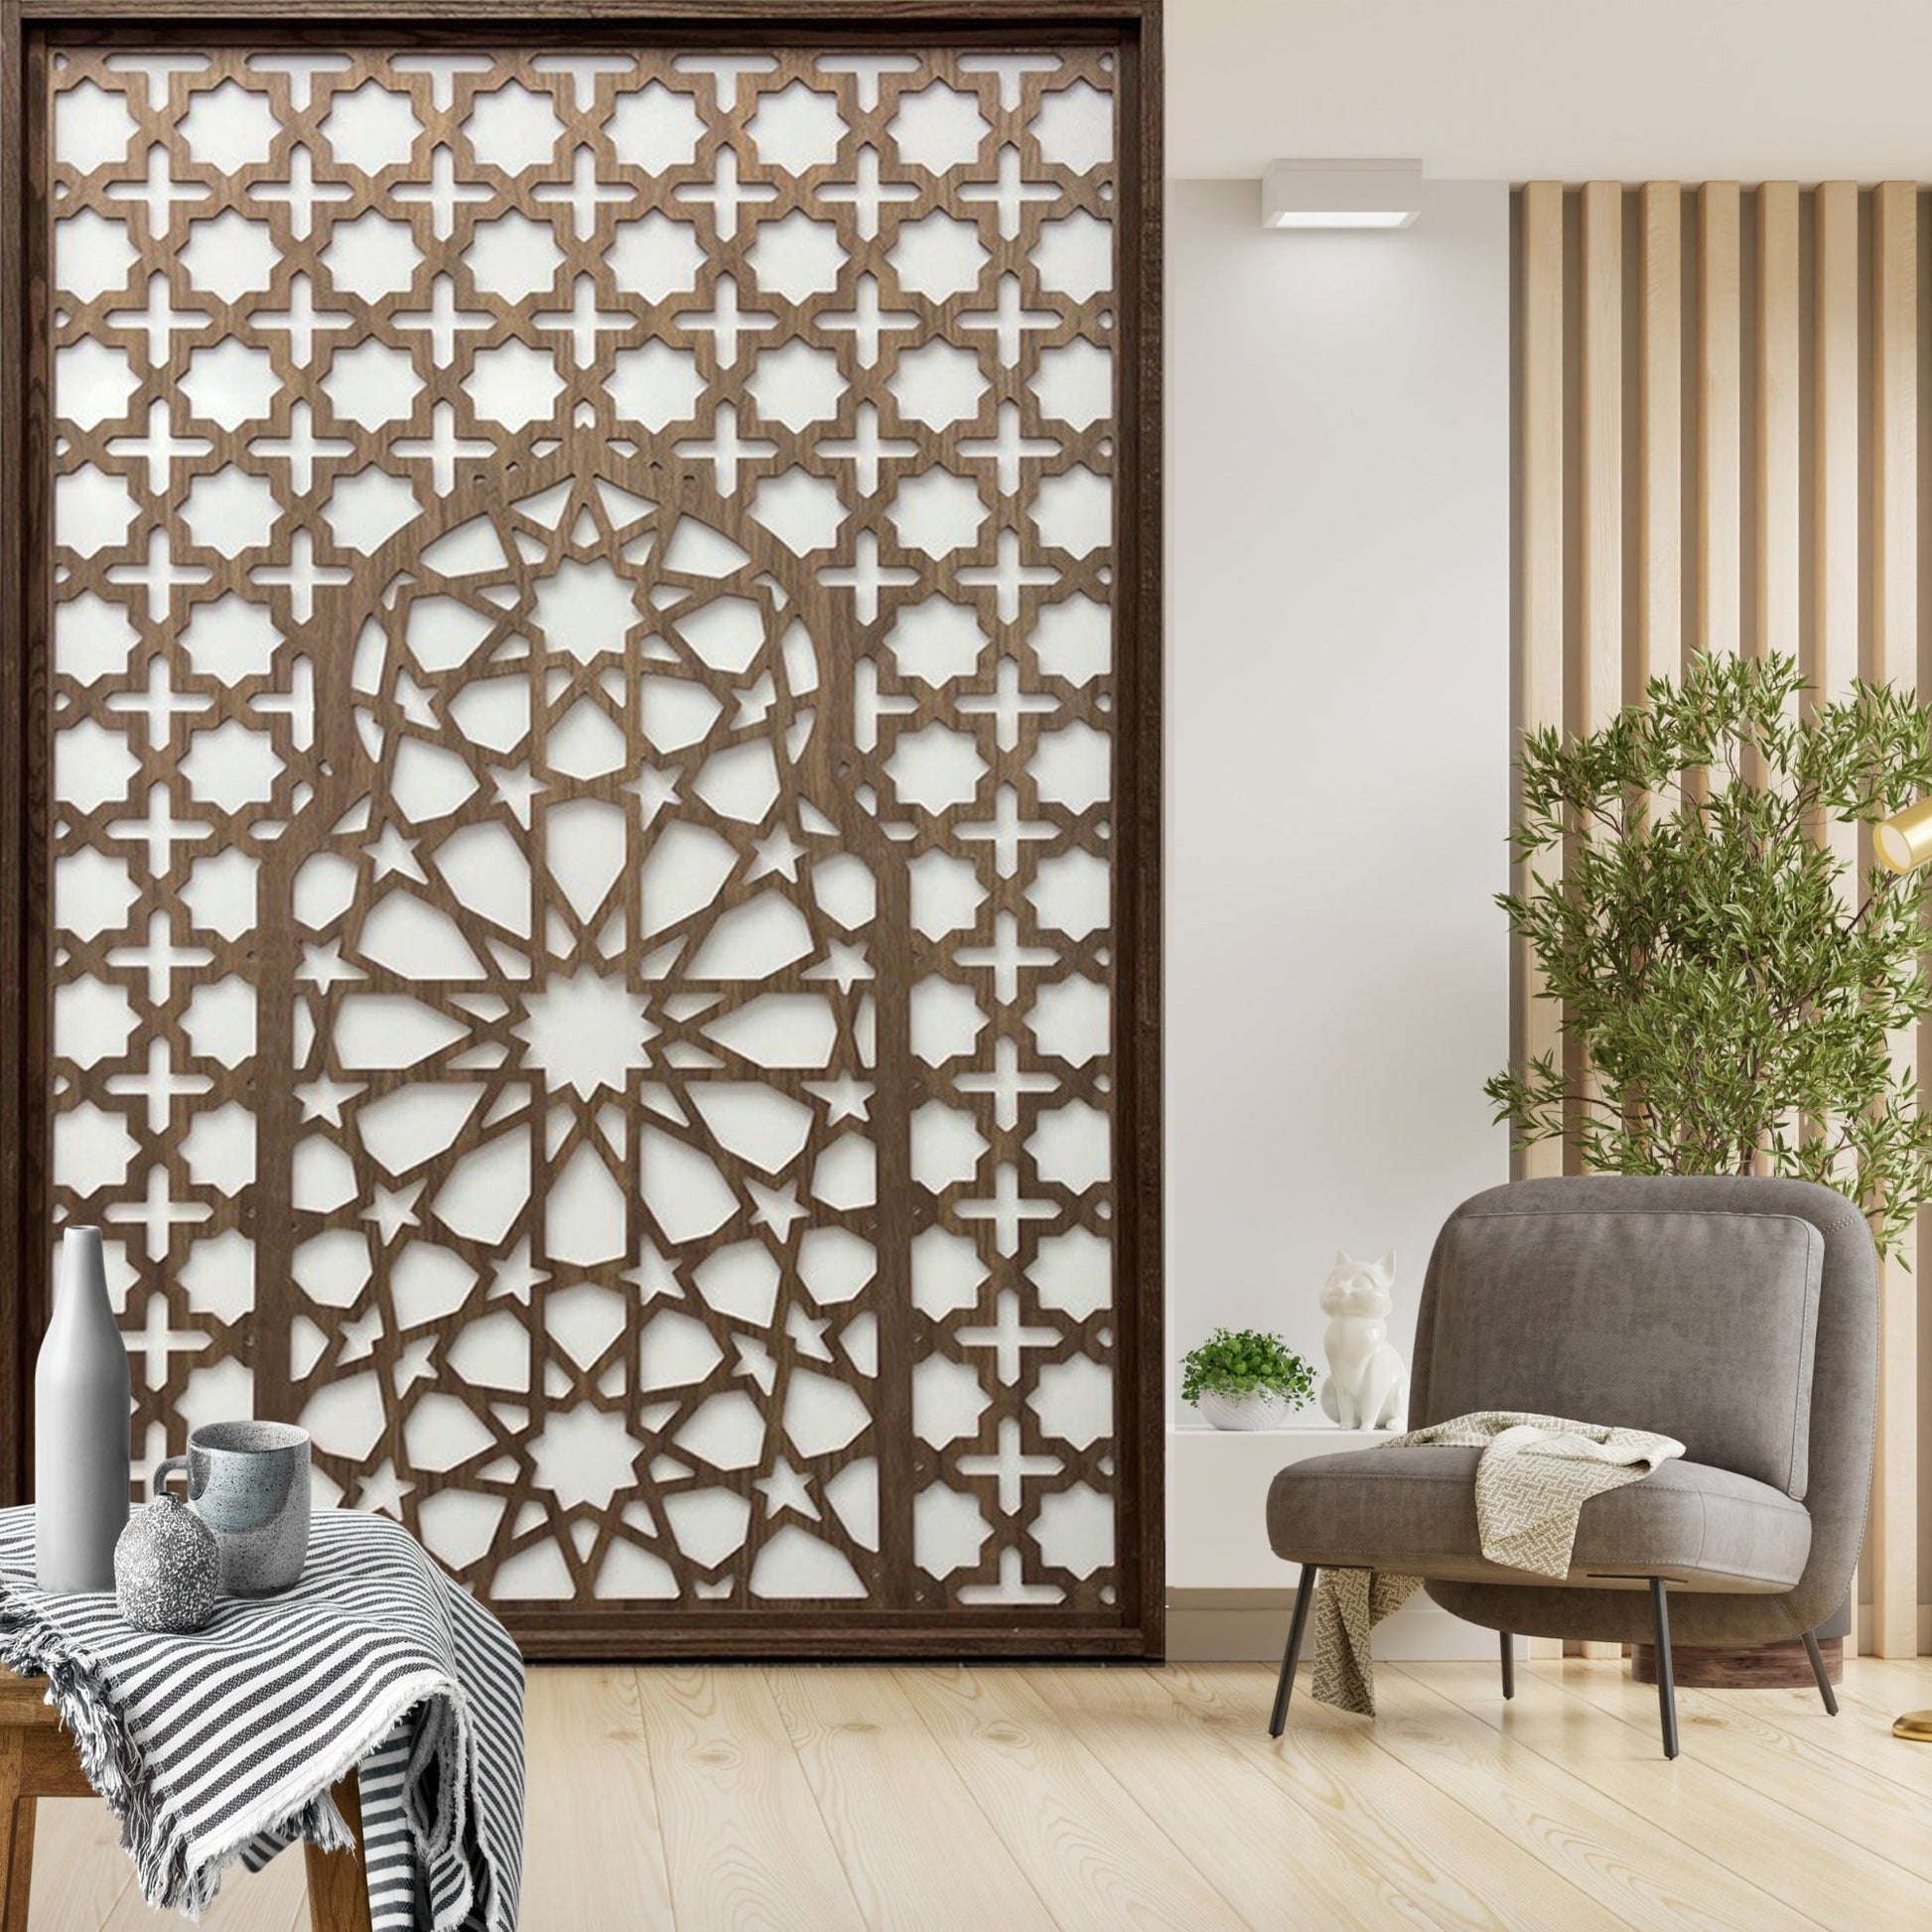 Moucharabieh, Mihrab, Islamic panels, Mosque partition, Mosque separator, custom panel, room divider, room dividers , craftivaart, Arc panel , Islamic divider, Islamic design, Masjid divider, mosque panel, Islamic room divider, Arc divider design, arc panel, yooga, meditation